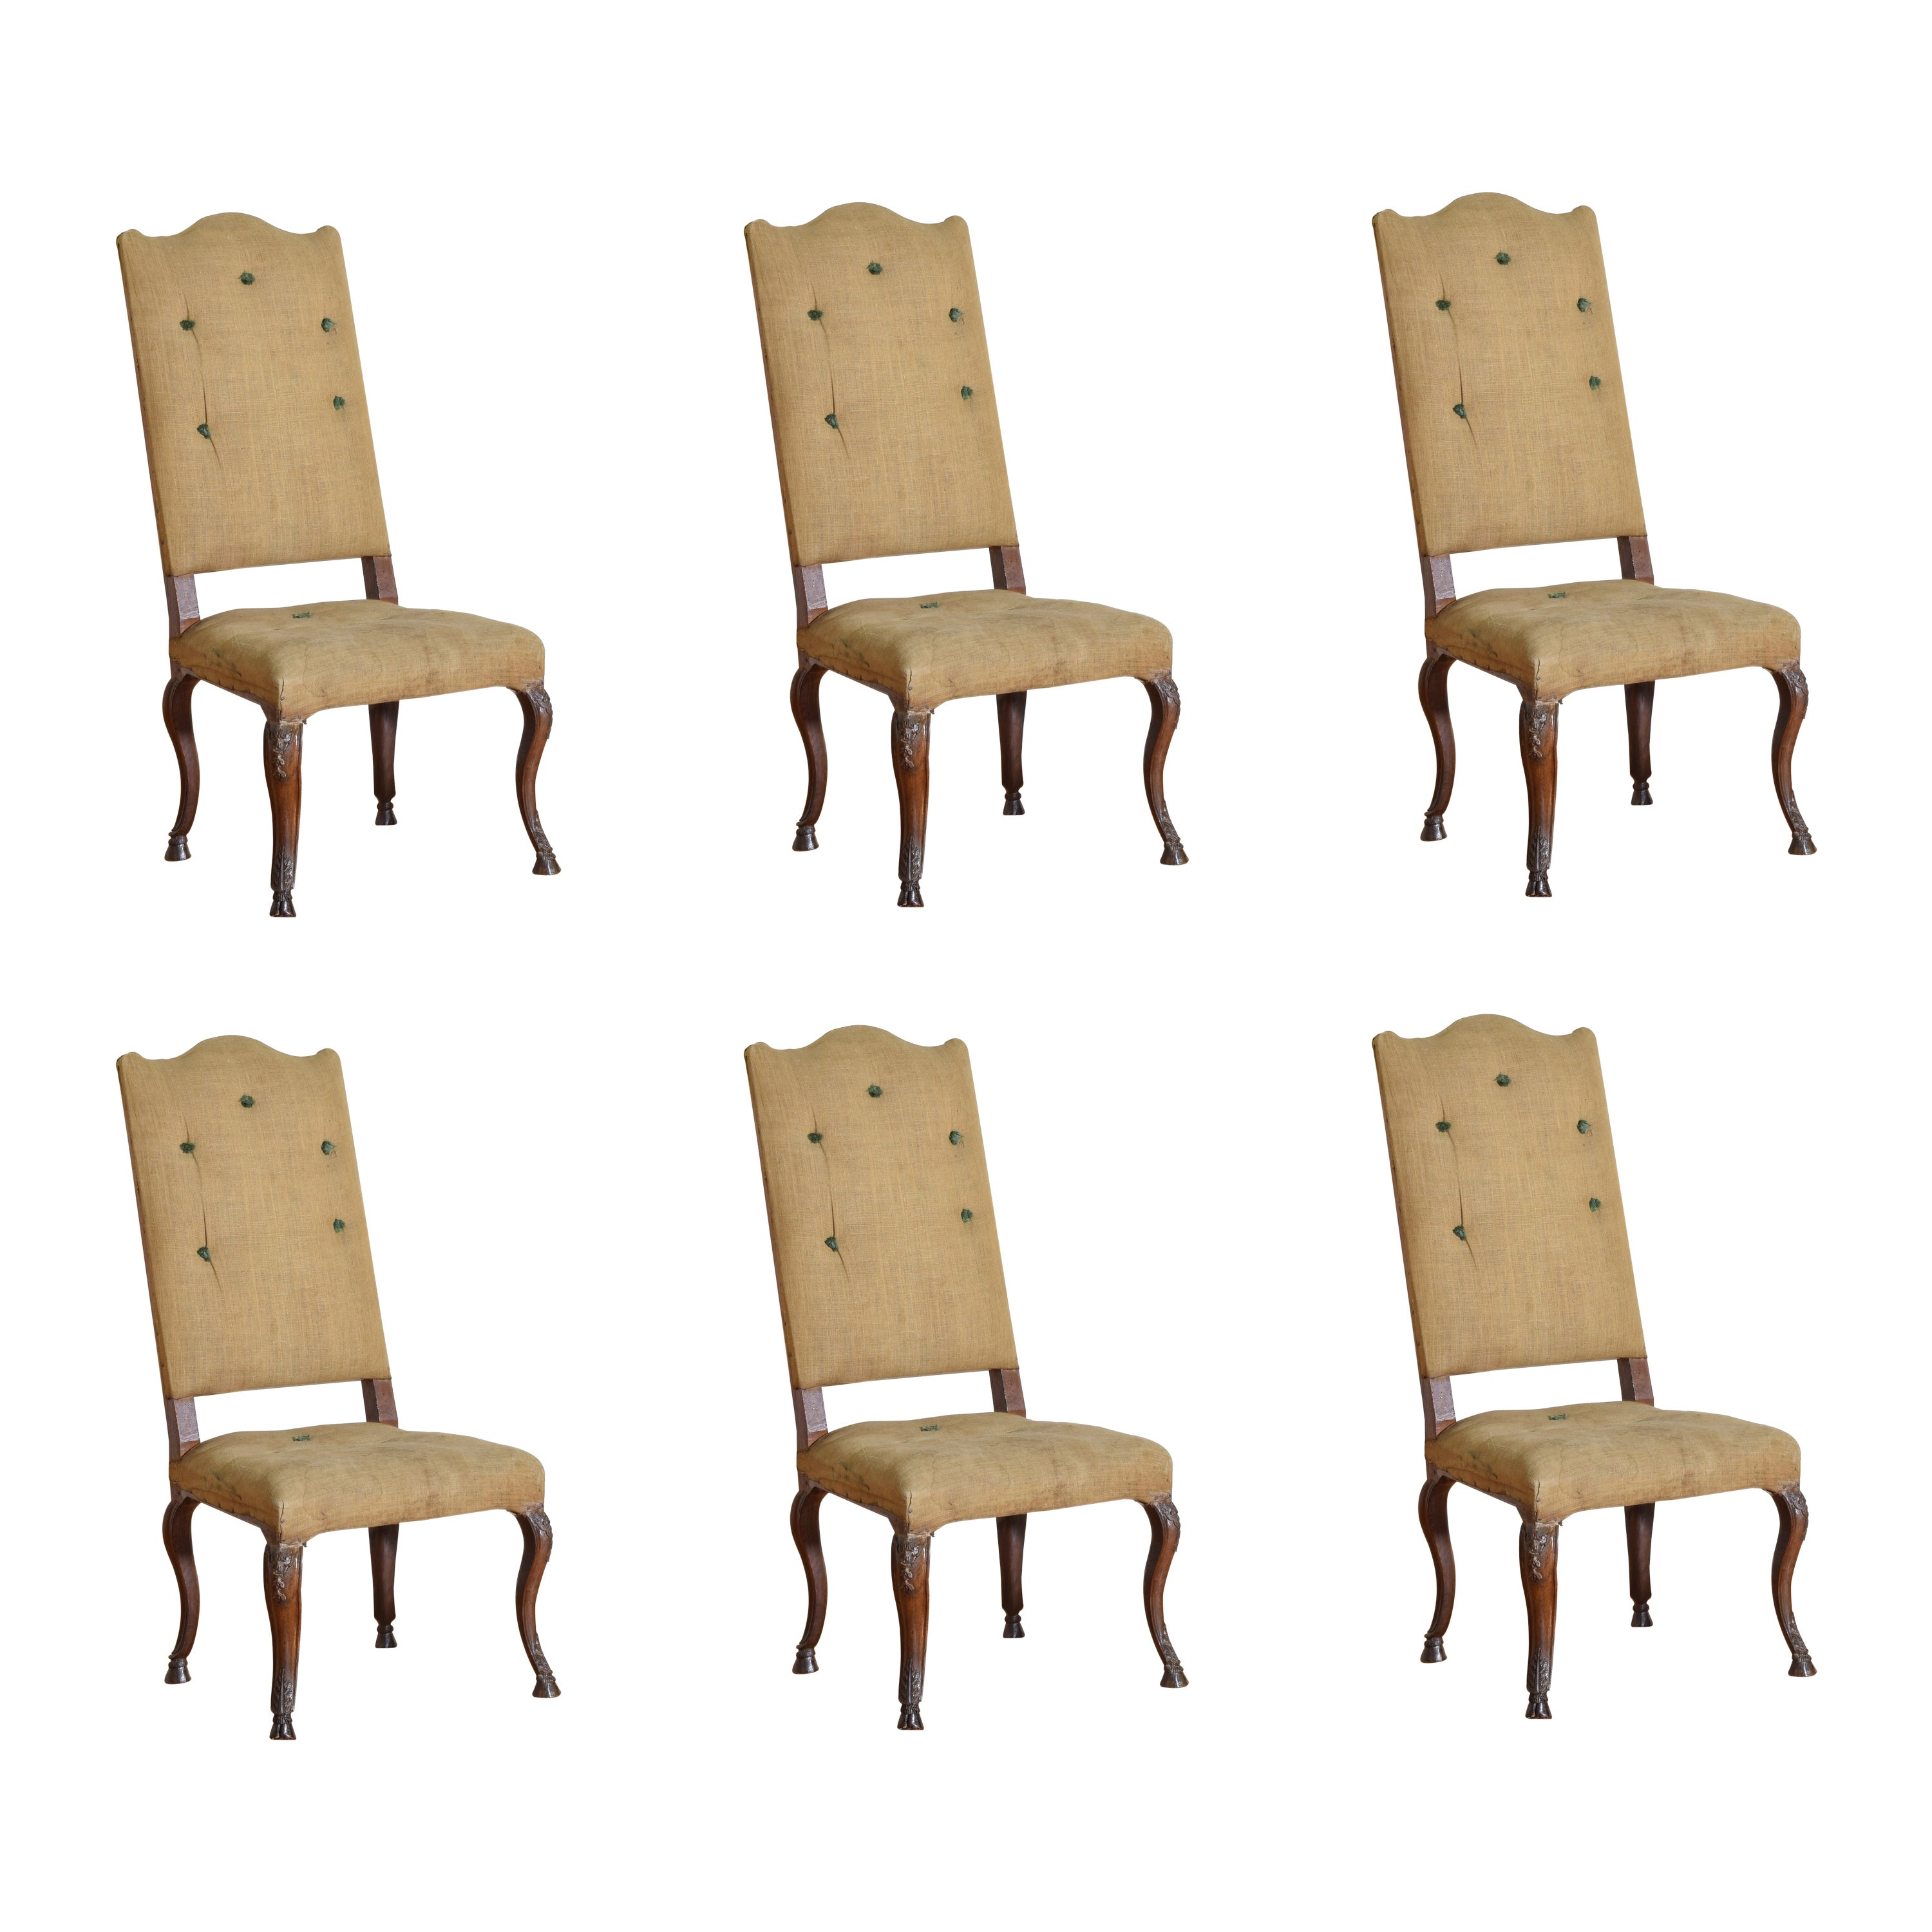 1760s Dining Room Chairs